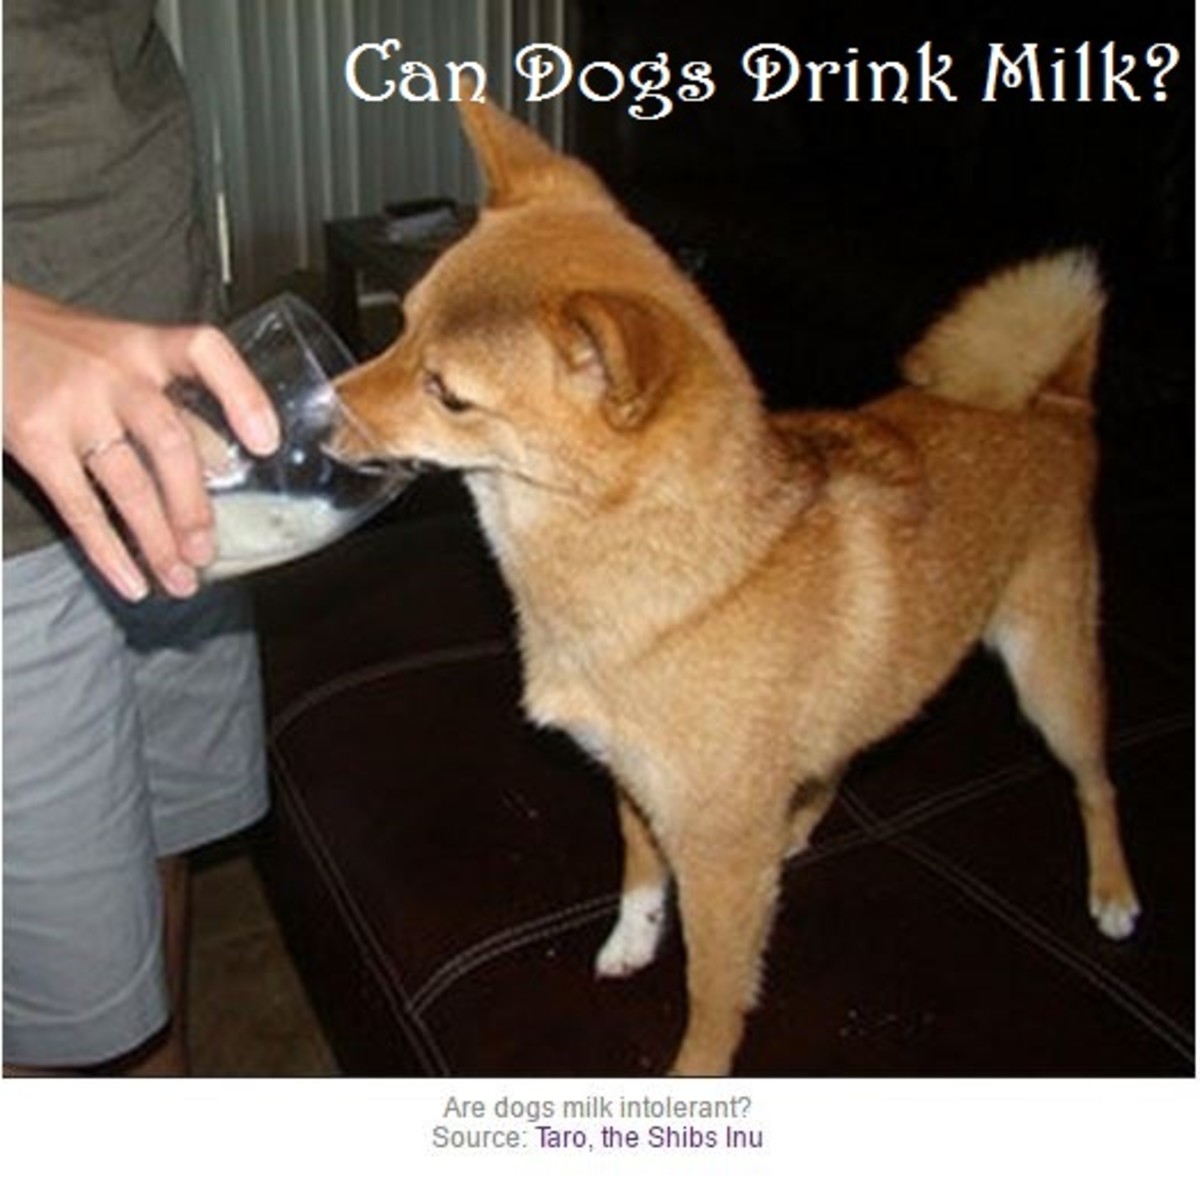 Can Dogs Drink Milk or are Dogs Lactose Intolerant?